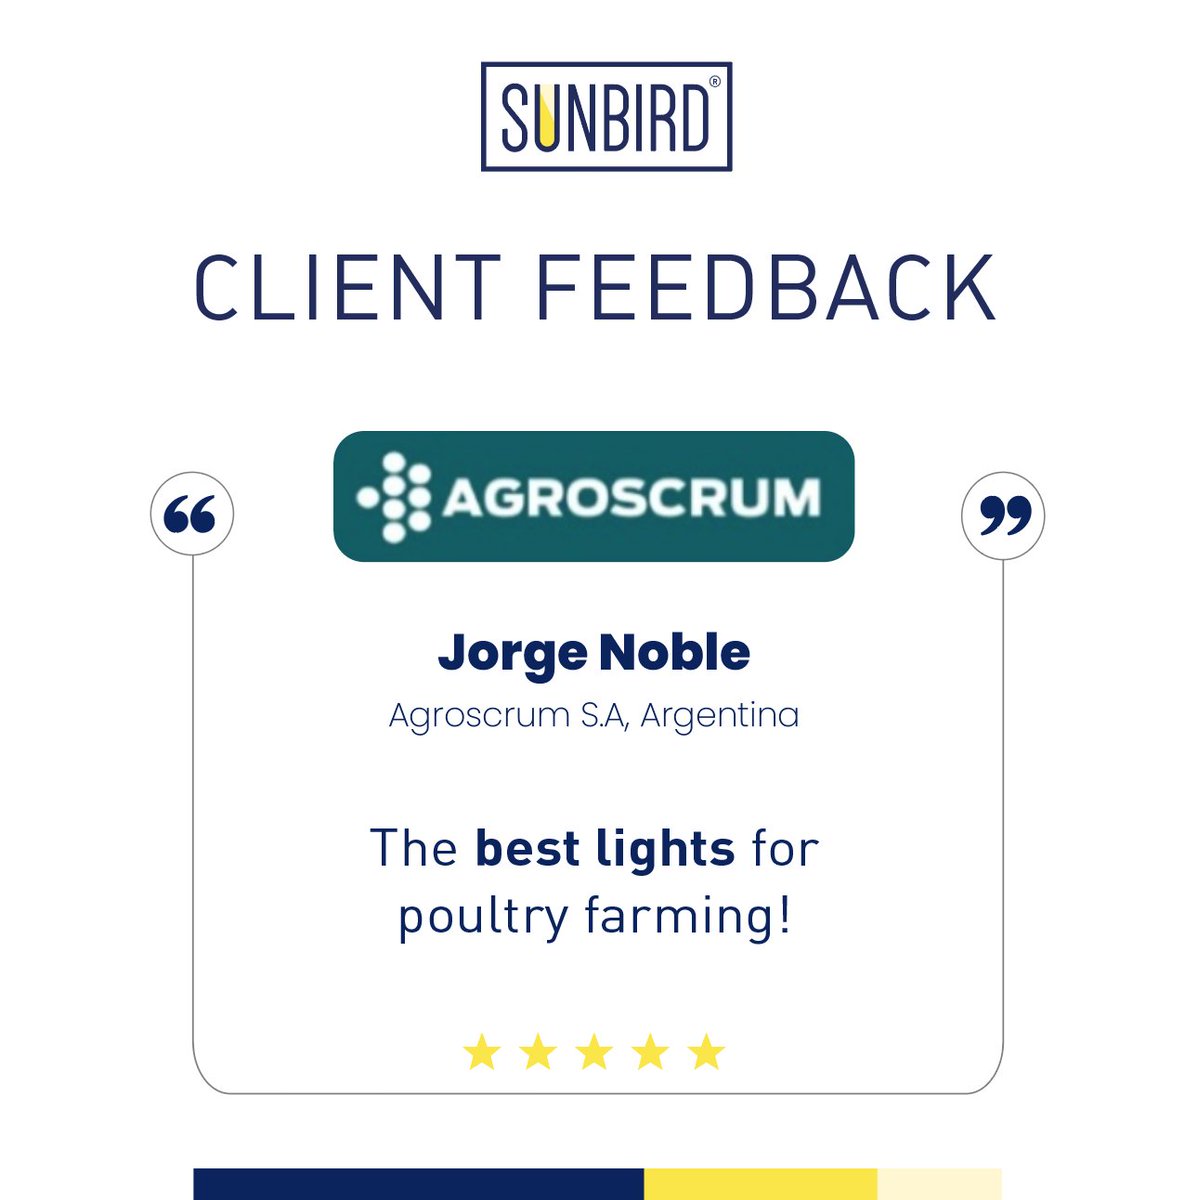 Thank you, Jorge, it is a pleasure to work with the Agroscrum  team and we look forward to more successful projects together.

#clientreview #customerfeedback #sunbirdLED #poultrylights